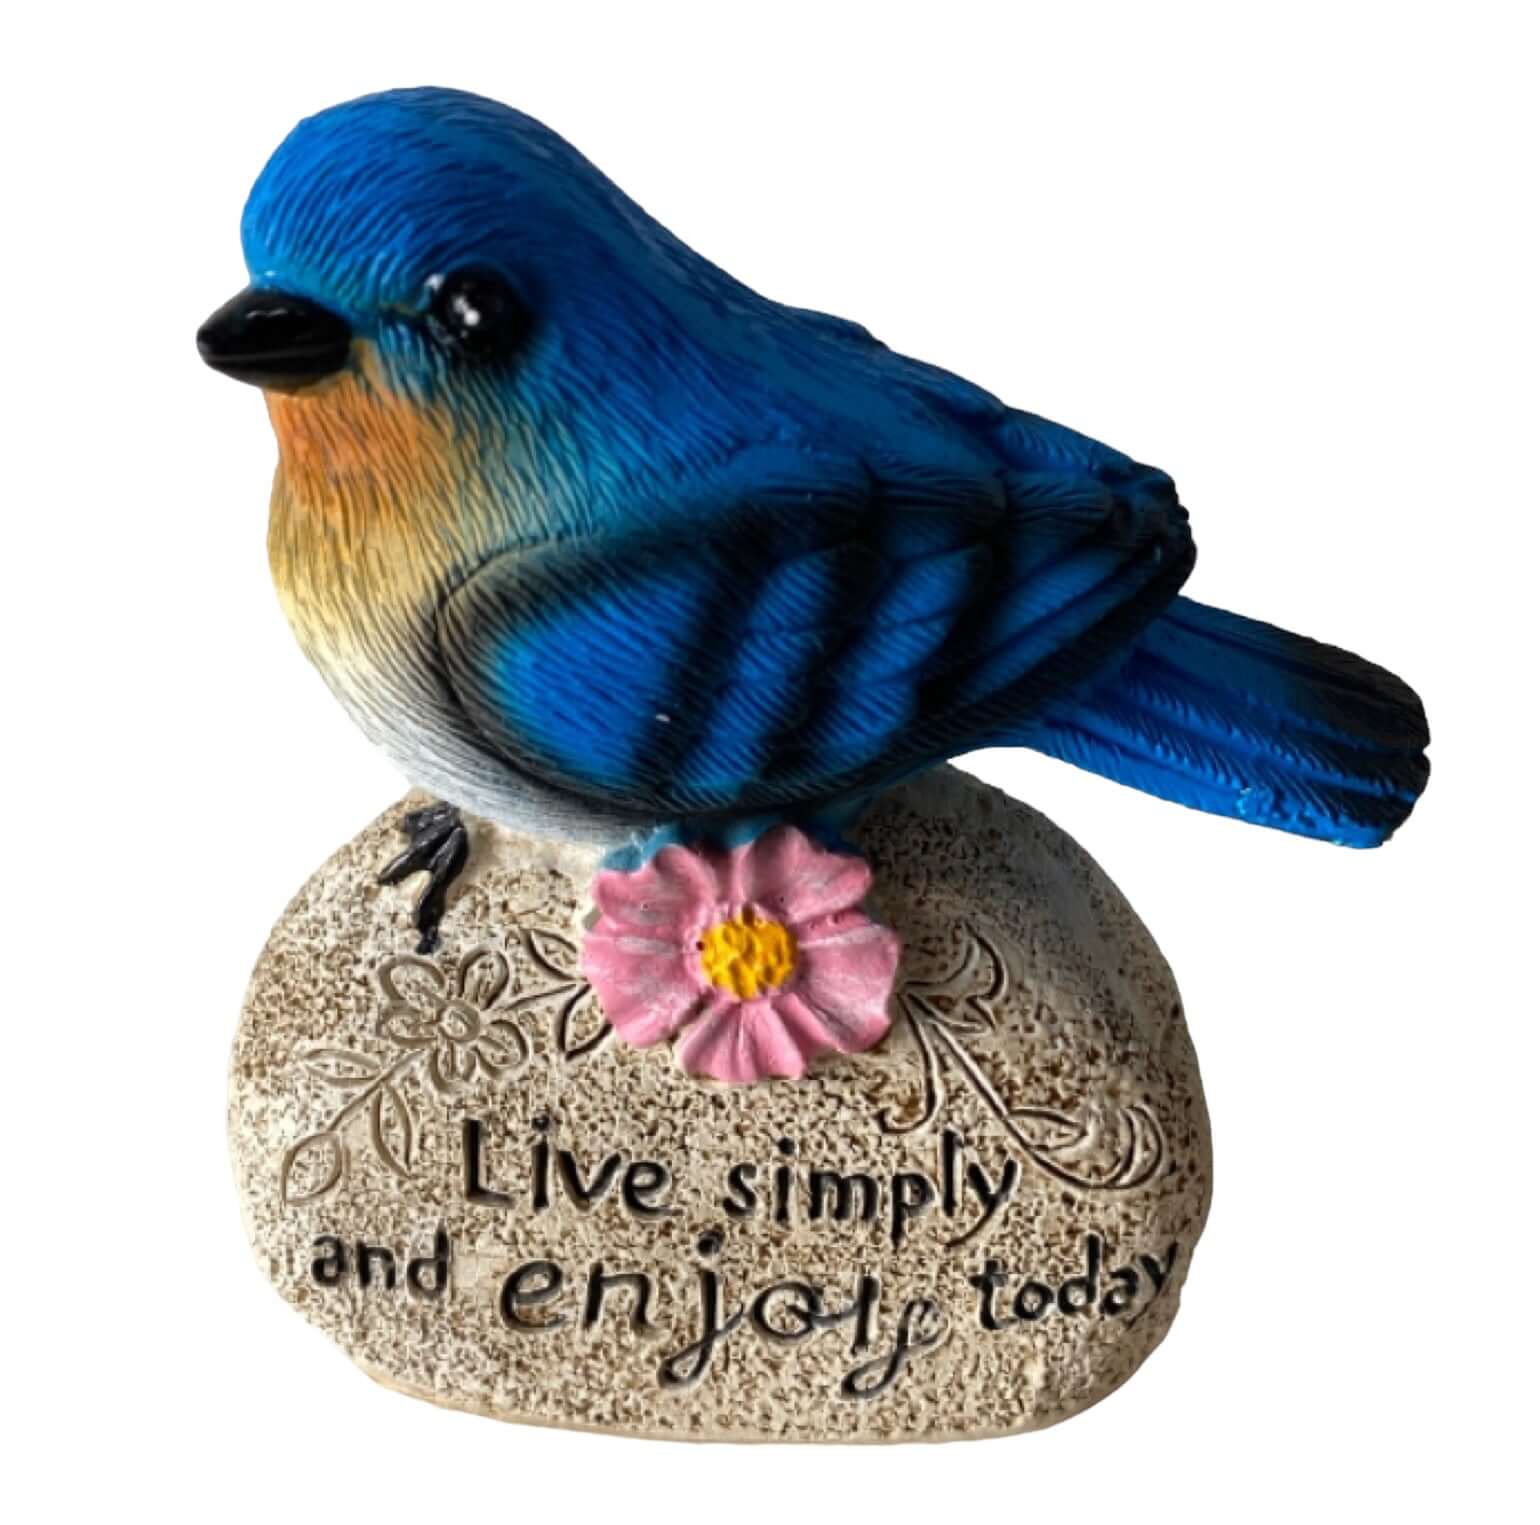 Bird Inspirational Live Simply - The Renmy Store Homewares & Gifts 